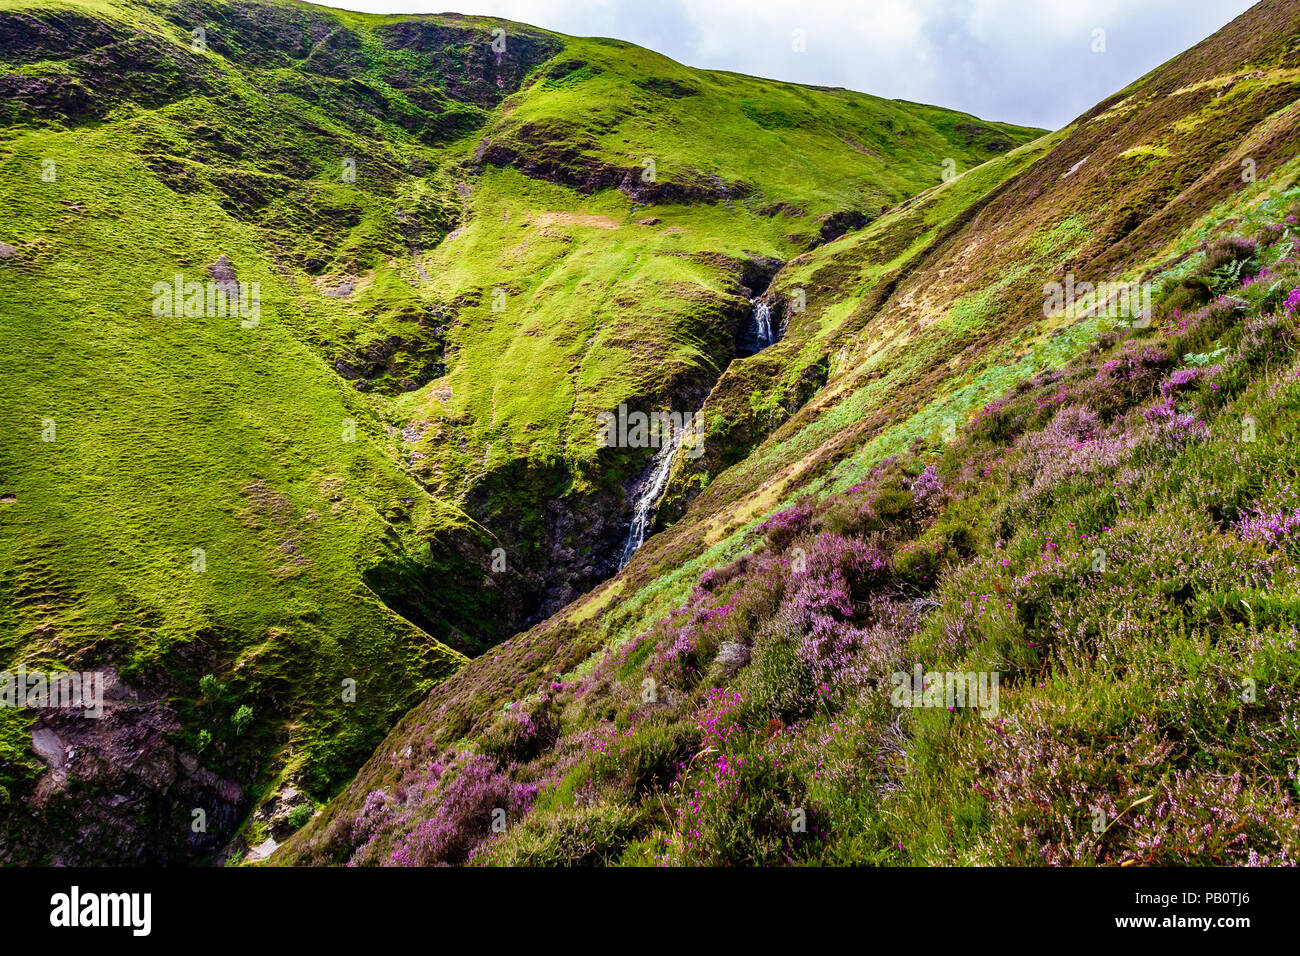 Heather growing on the slopes around Grey Mare's Tail waterfall, Dumfries & Galloway, Scotland, UK. Stock Photo